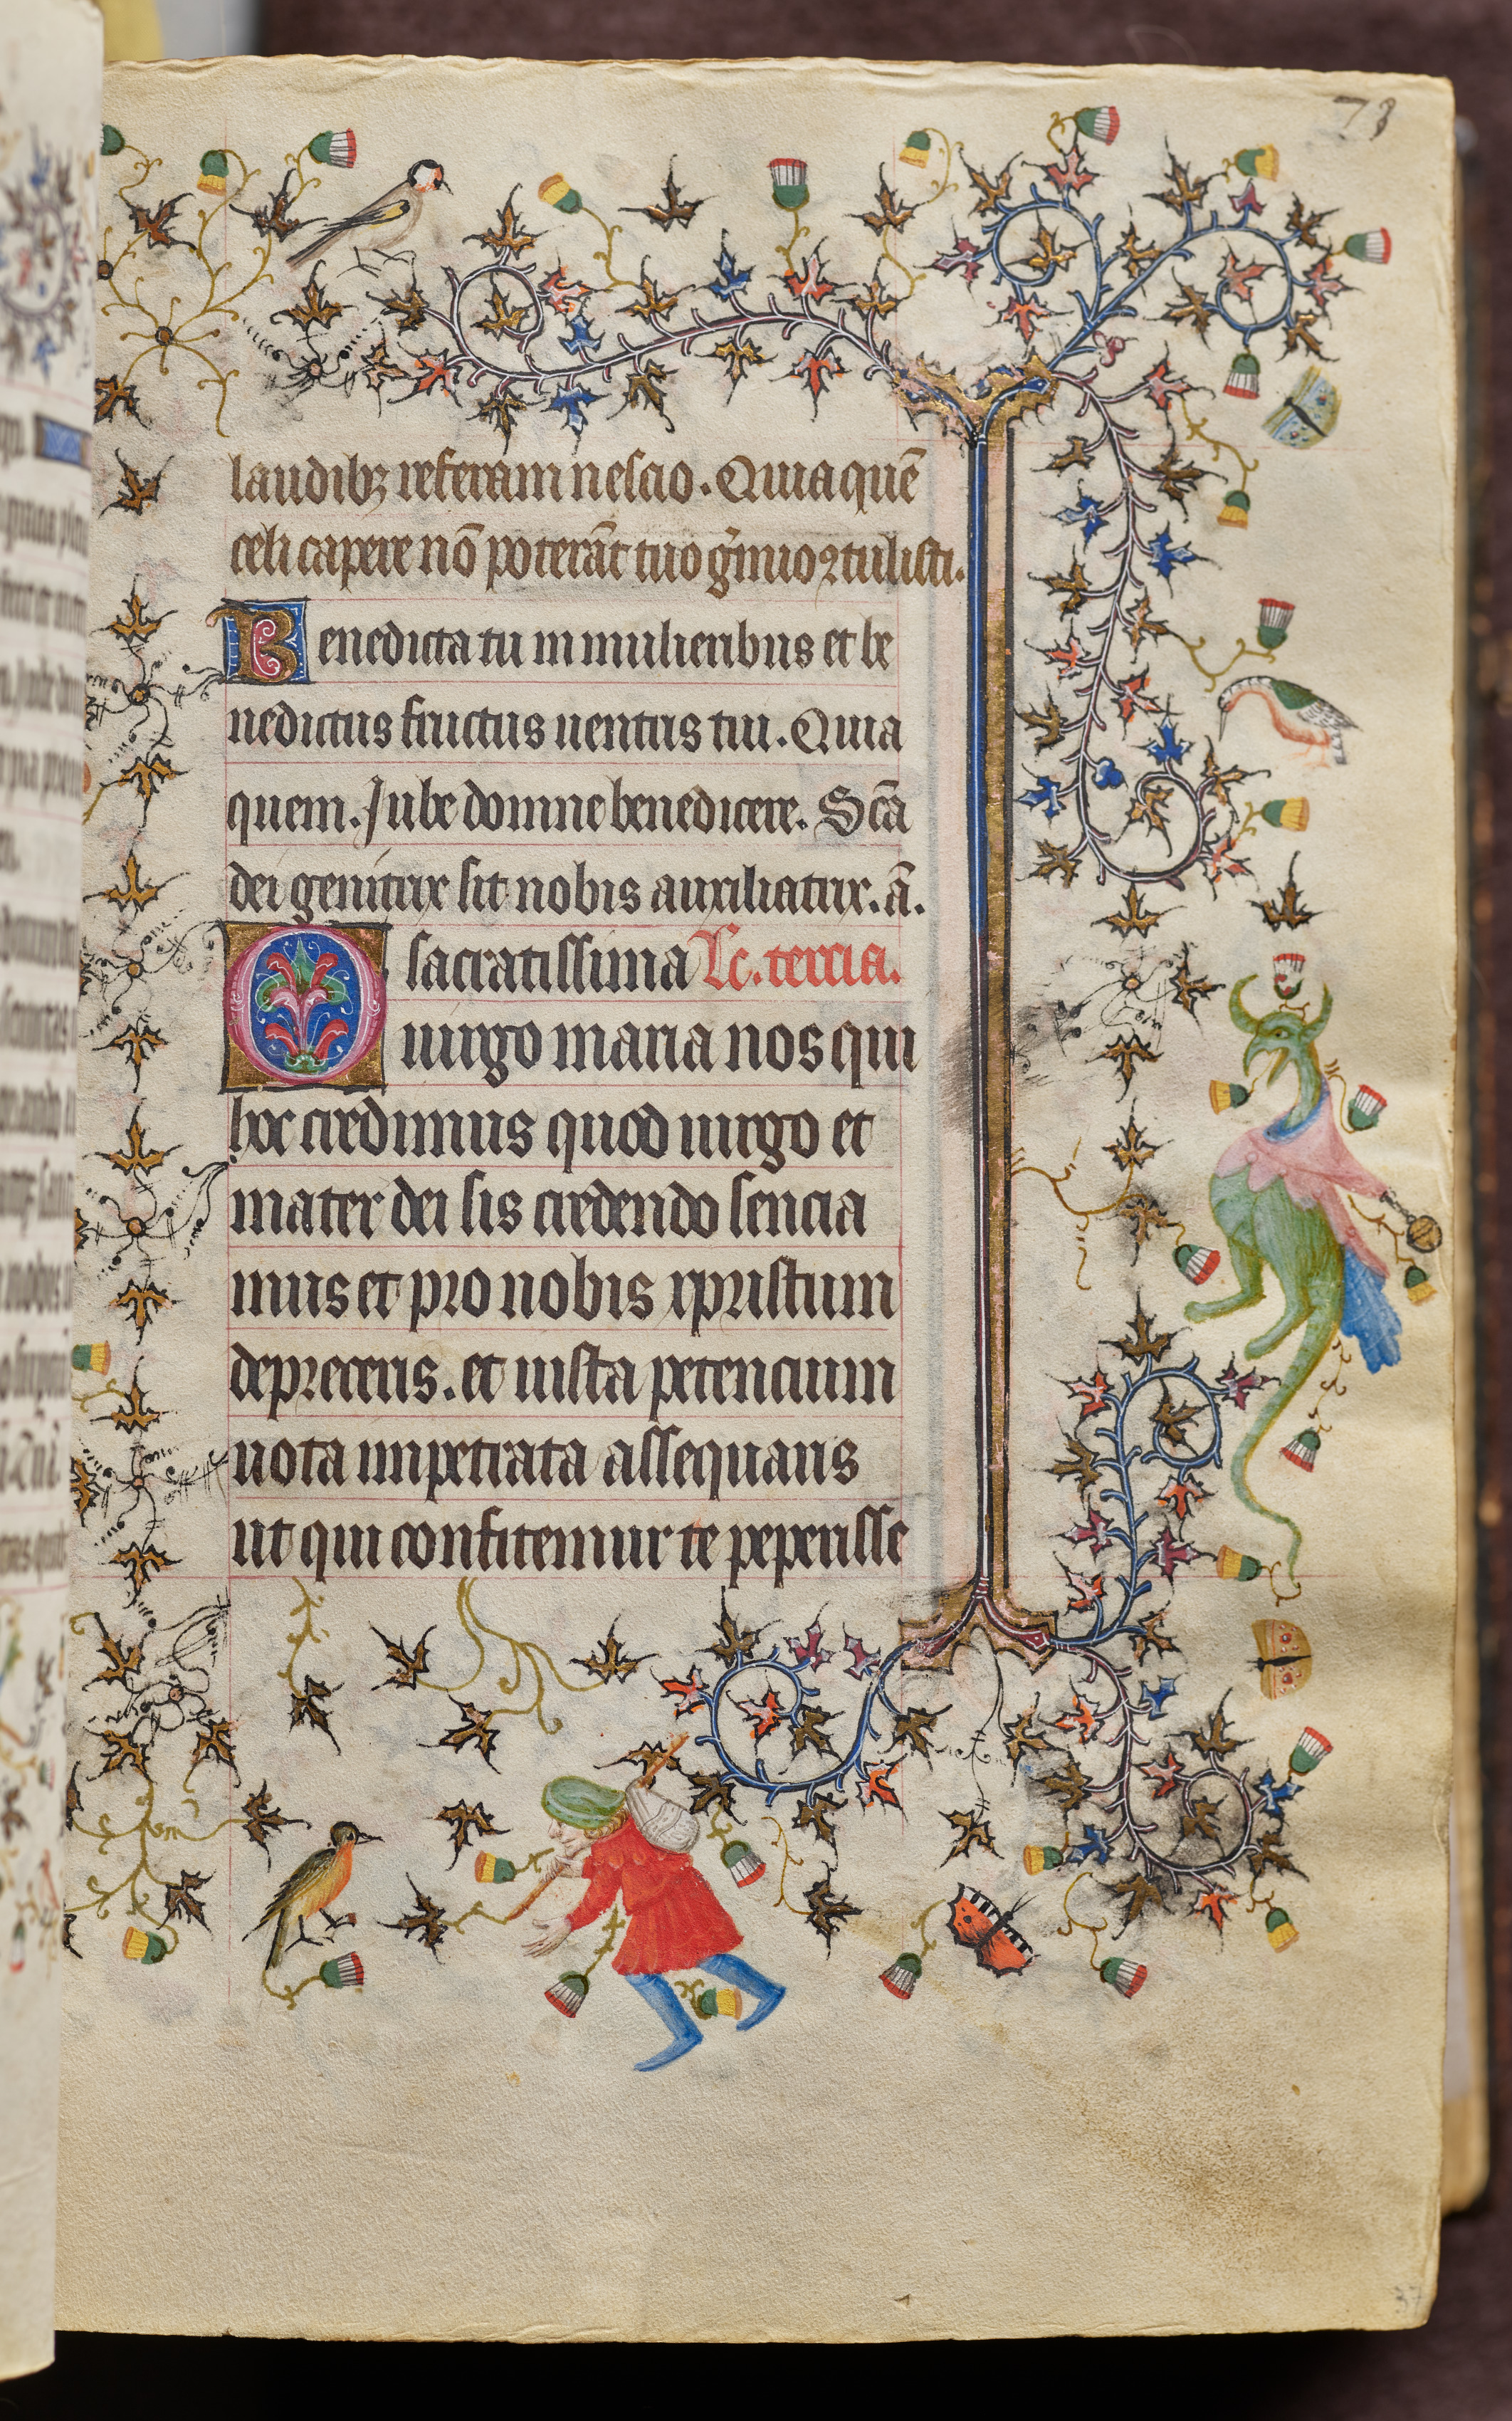 Hours of Charles the Noble, King of Navarre (1361-1425): fol. 37r, Text